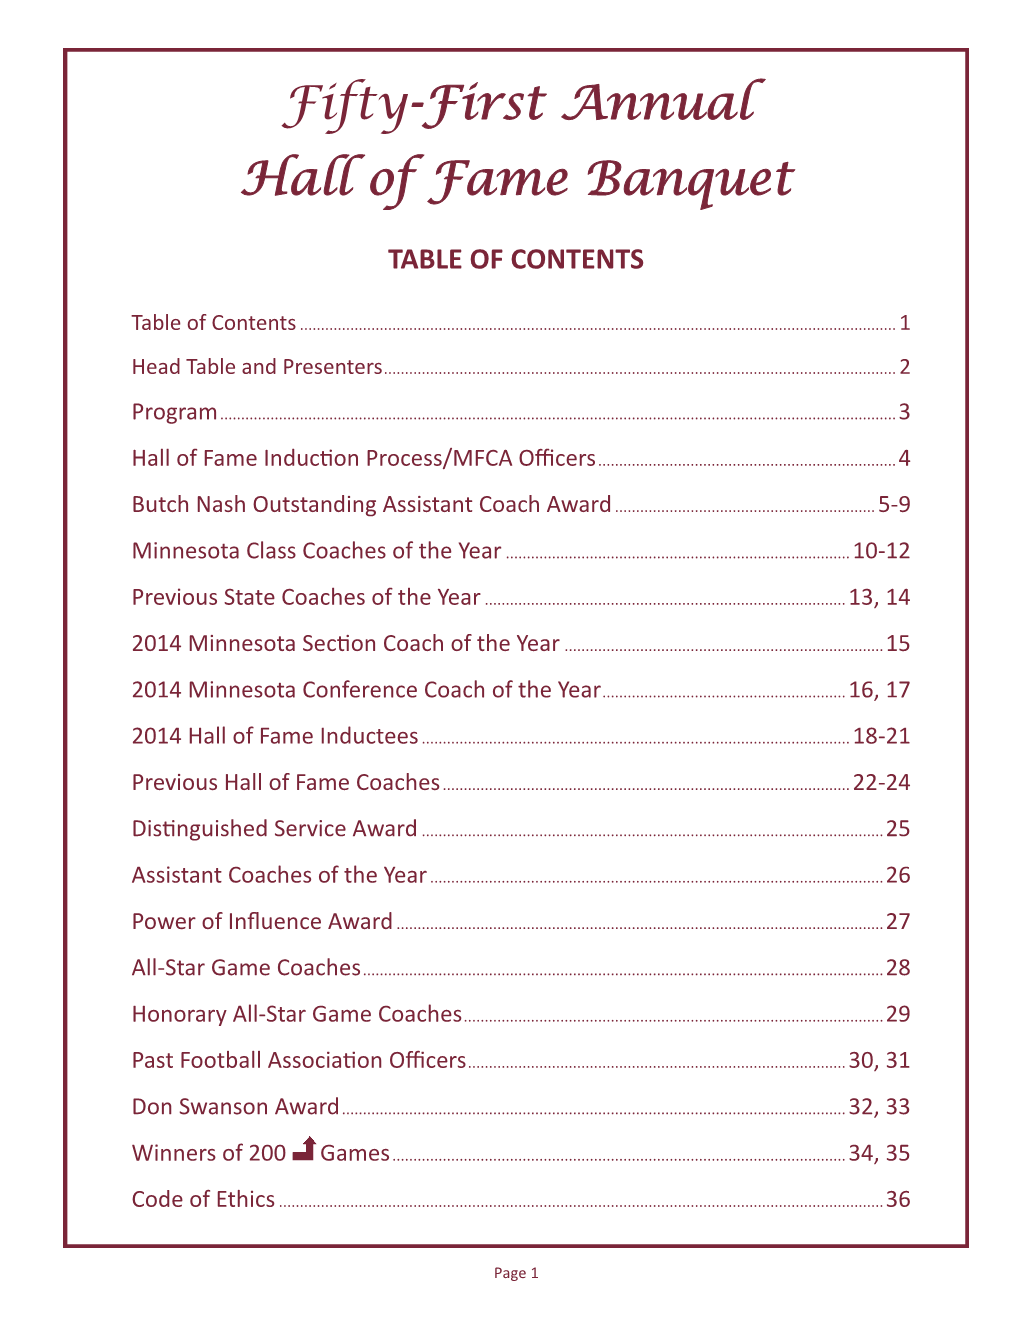 Fifty-First Annual Hall of Fame Banquet